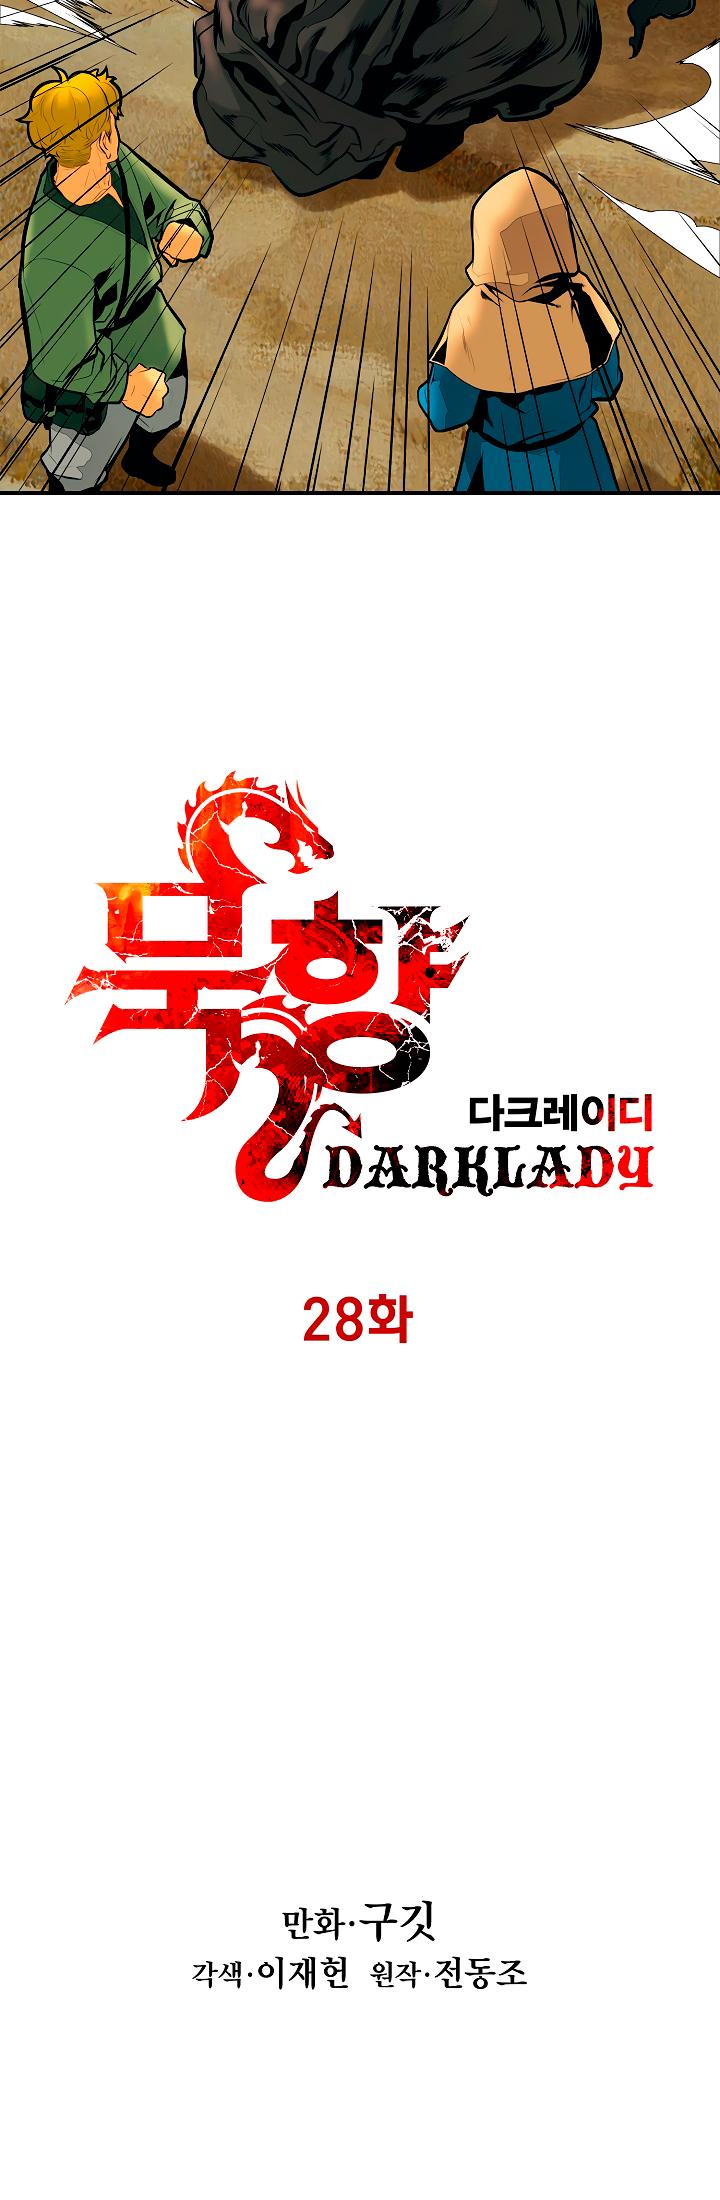 Mookhyang - Dark Lady Chapter 28